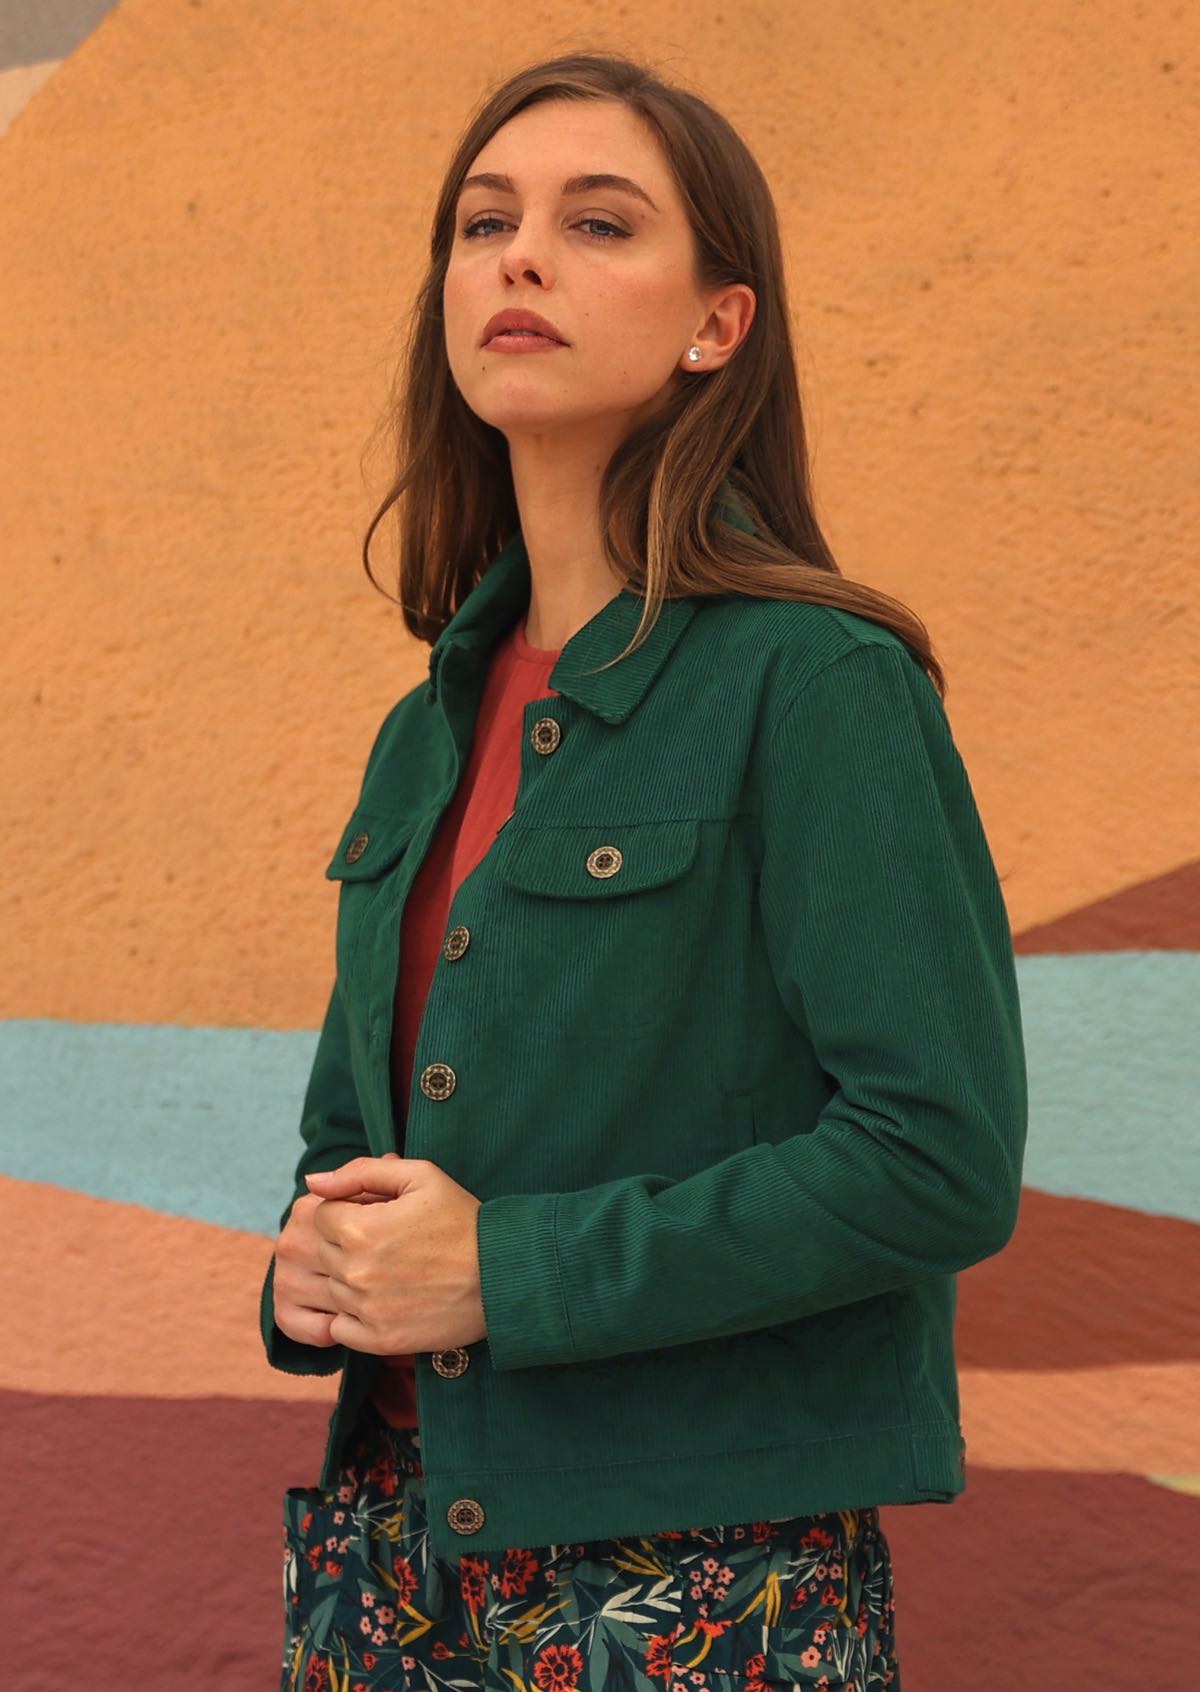 Cotton corduroy jacket with adjustable tabs and brass buttons